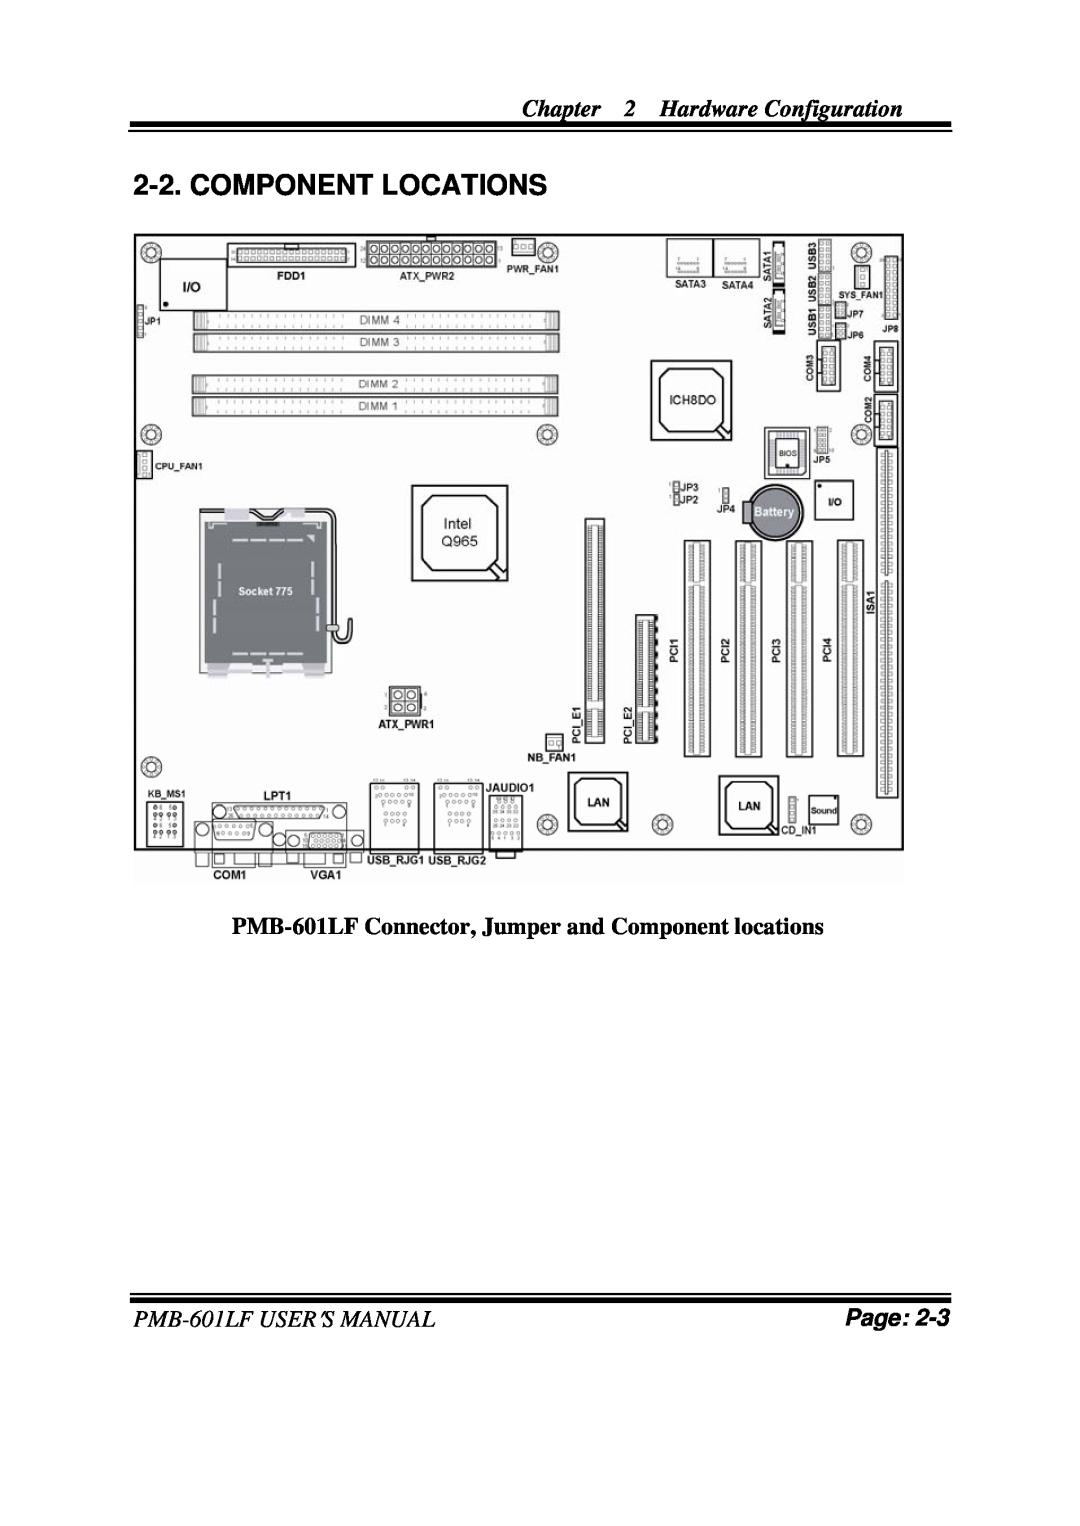 Intel user manual Component Locations, Hardware Configuration, PMB-601LFUSER′S MANUAL, Page 